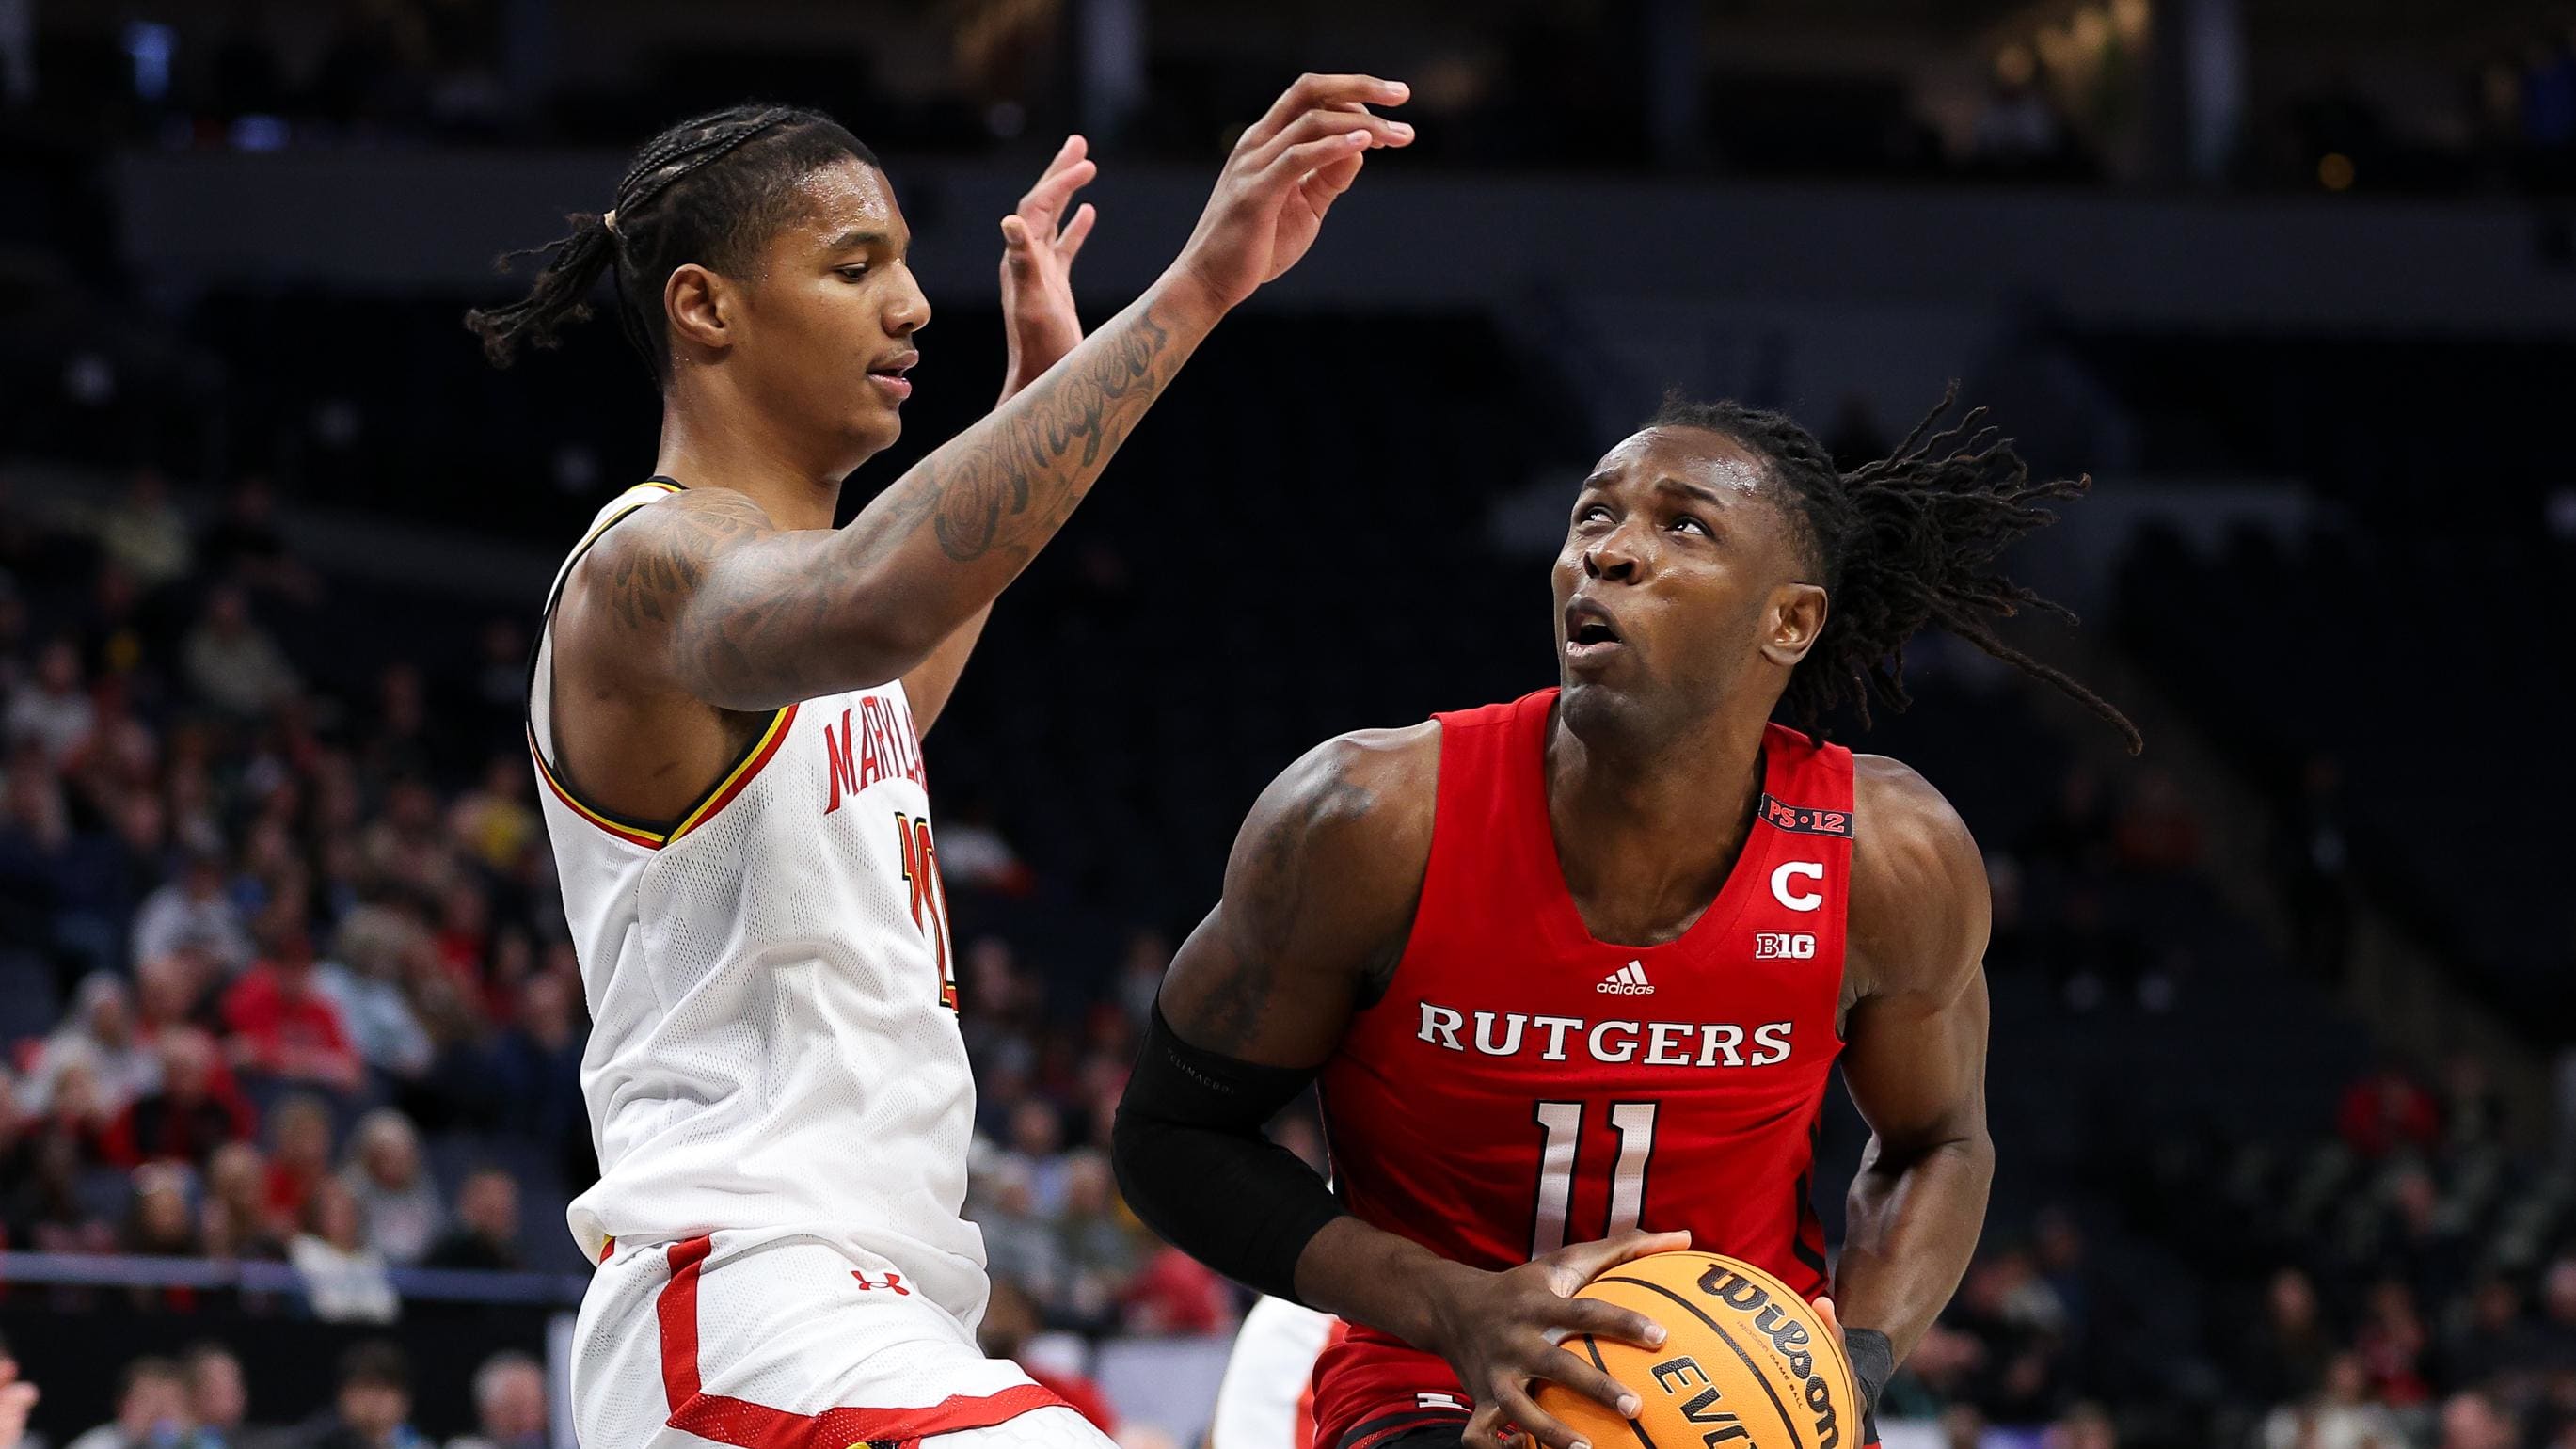 Rutgers Transfer Clifford Omoruyi: Top 5 Ranked Player Considering Georgia Tech & More